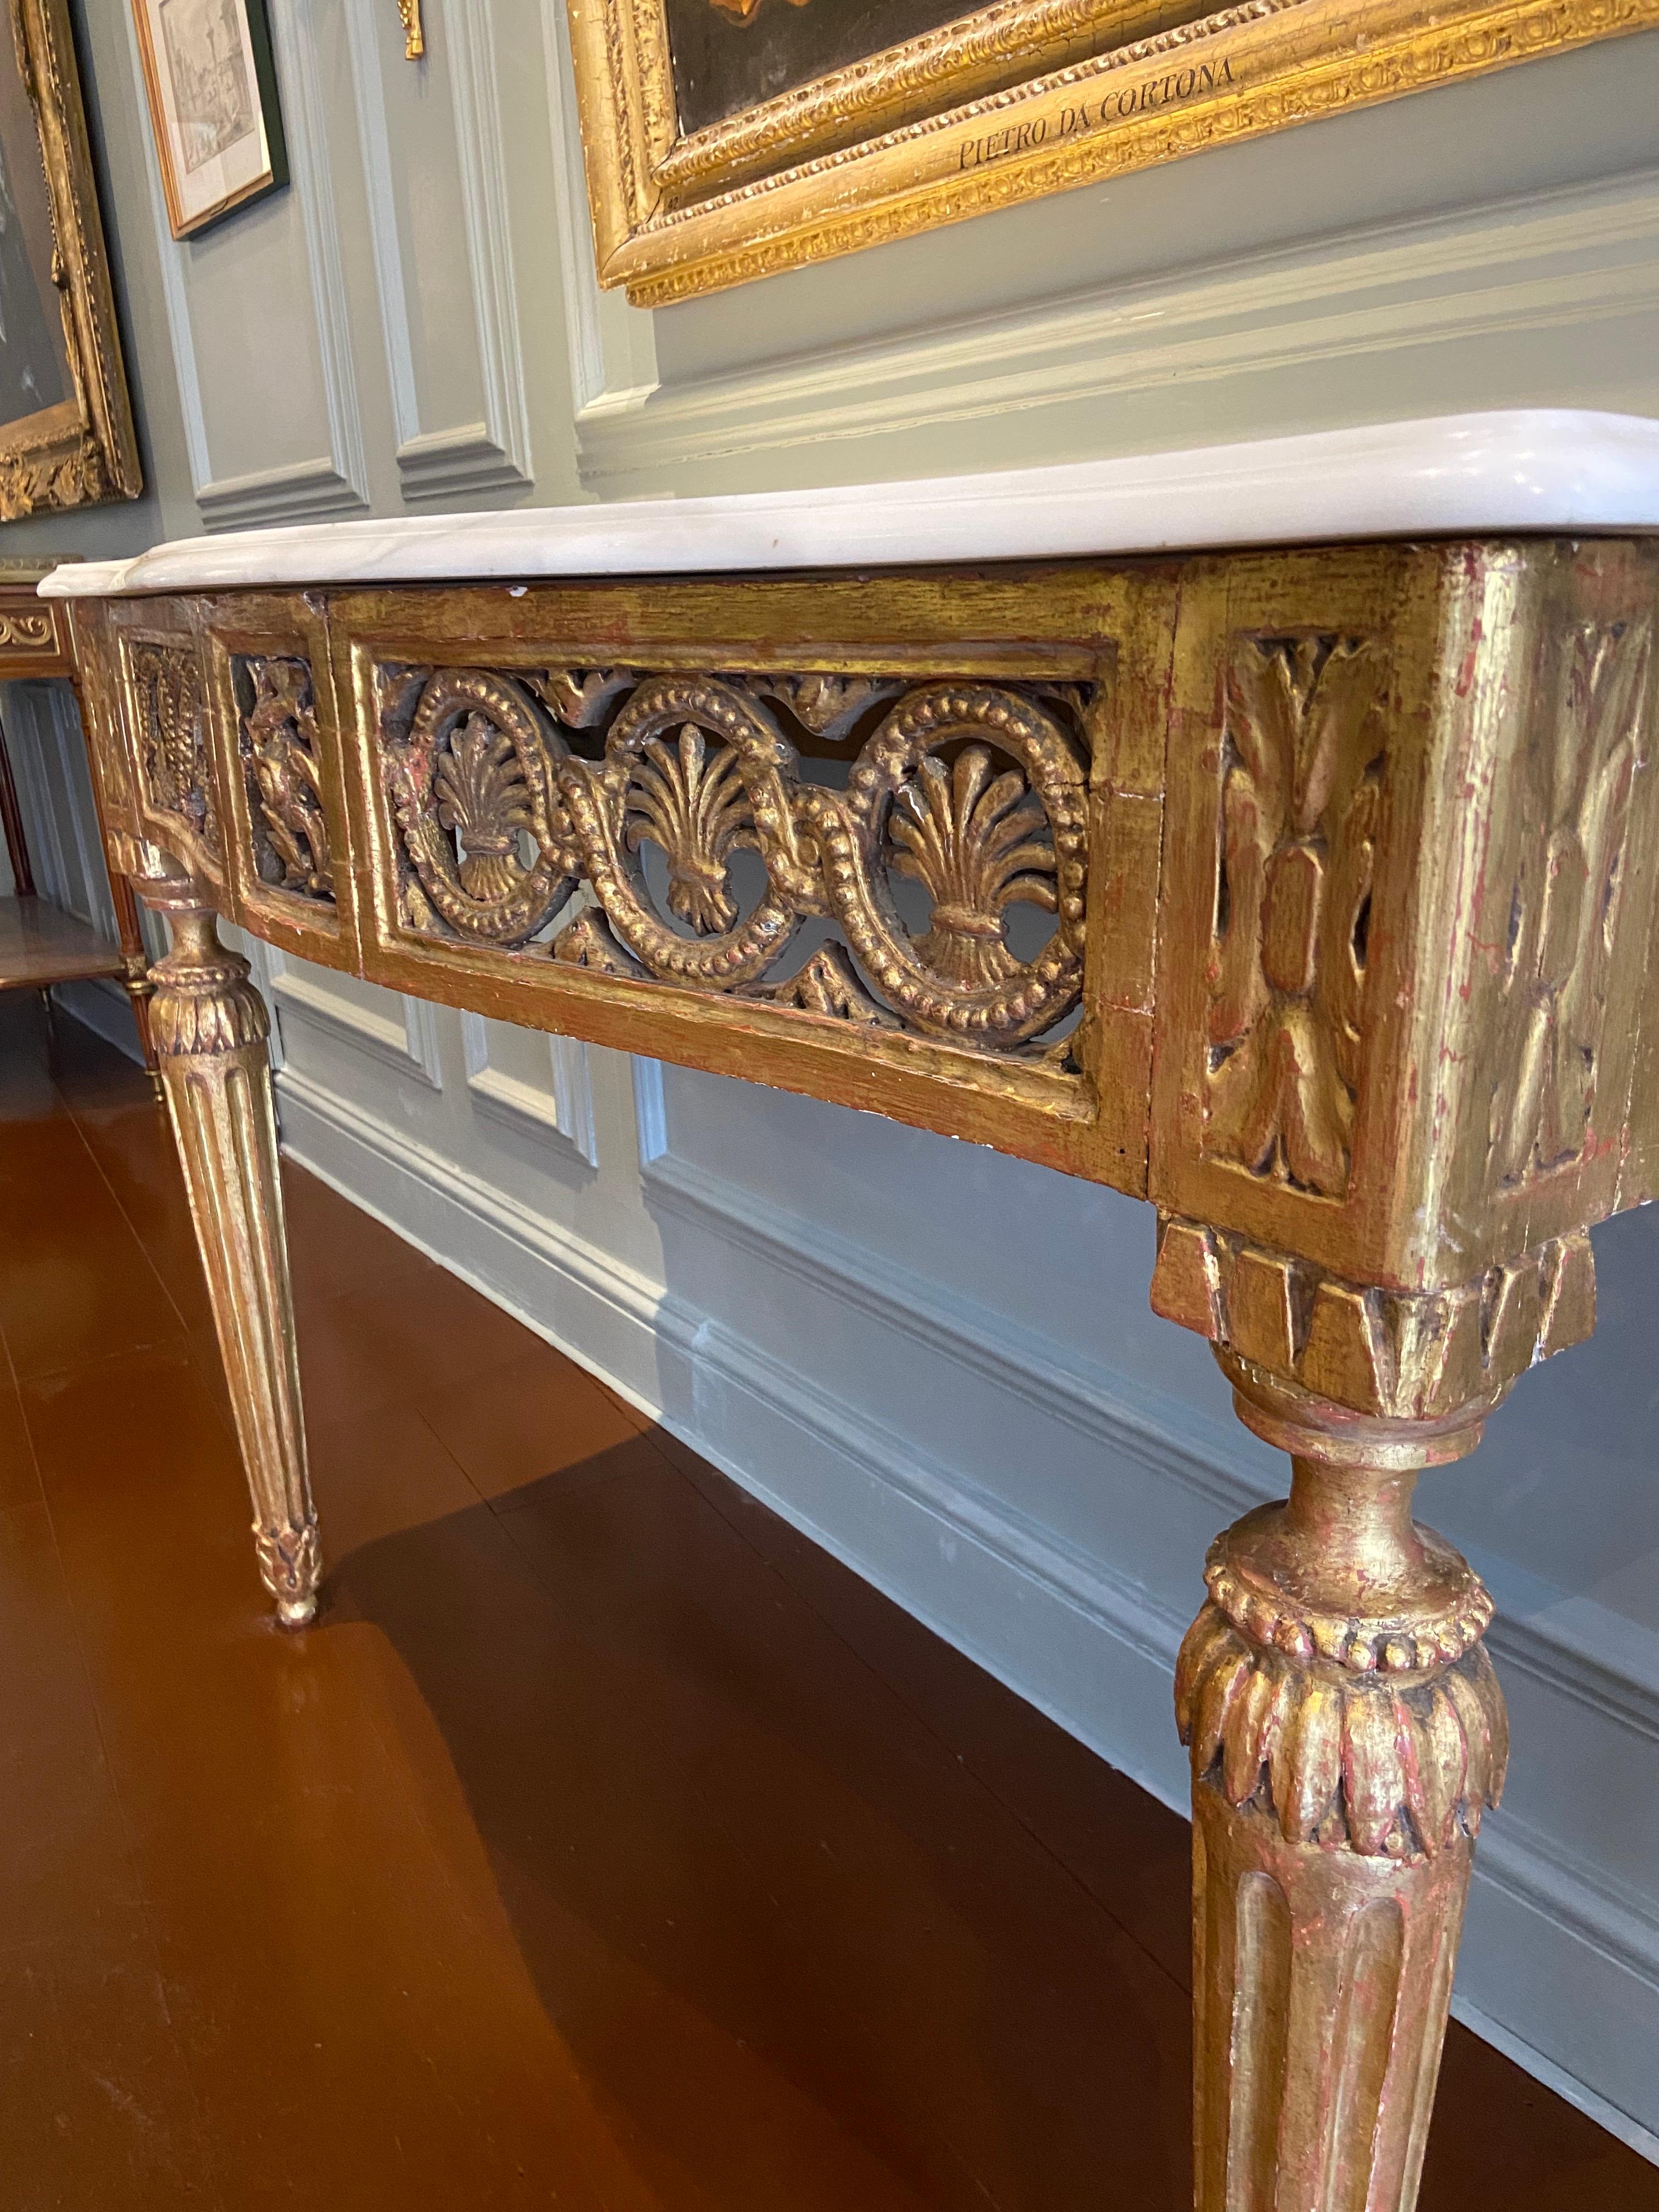 Northern Italian Serpentine Carved Gilt-Wood Console Table 'Late 18th Century' For Sale 2